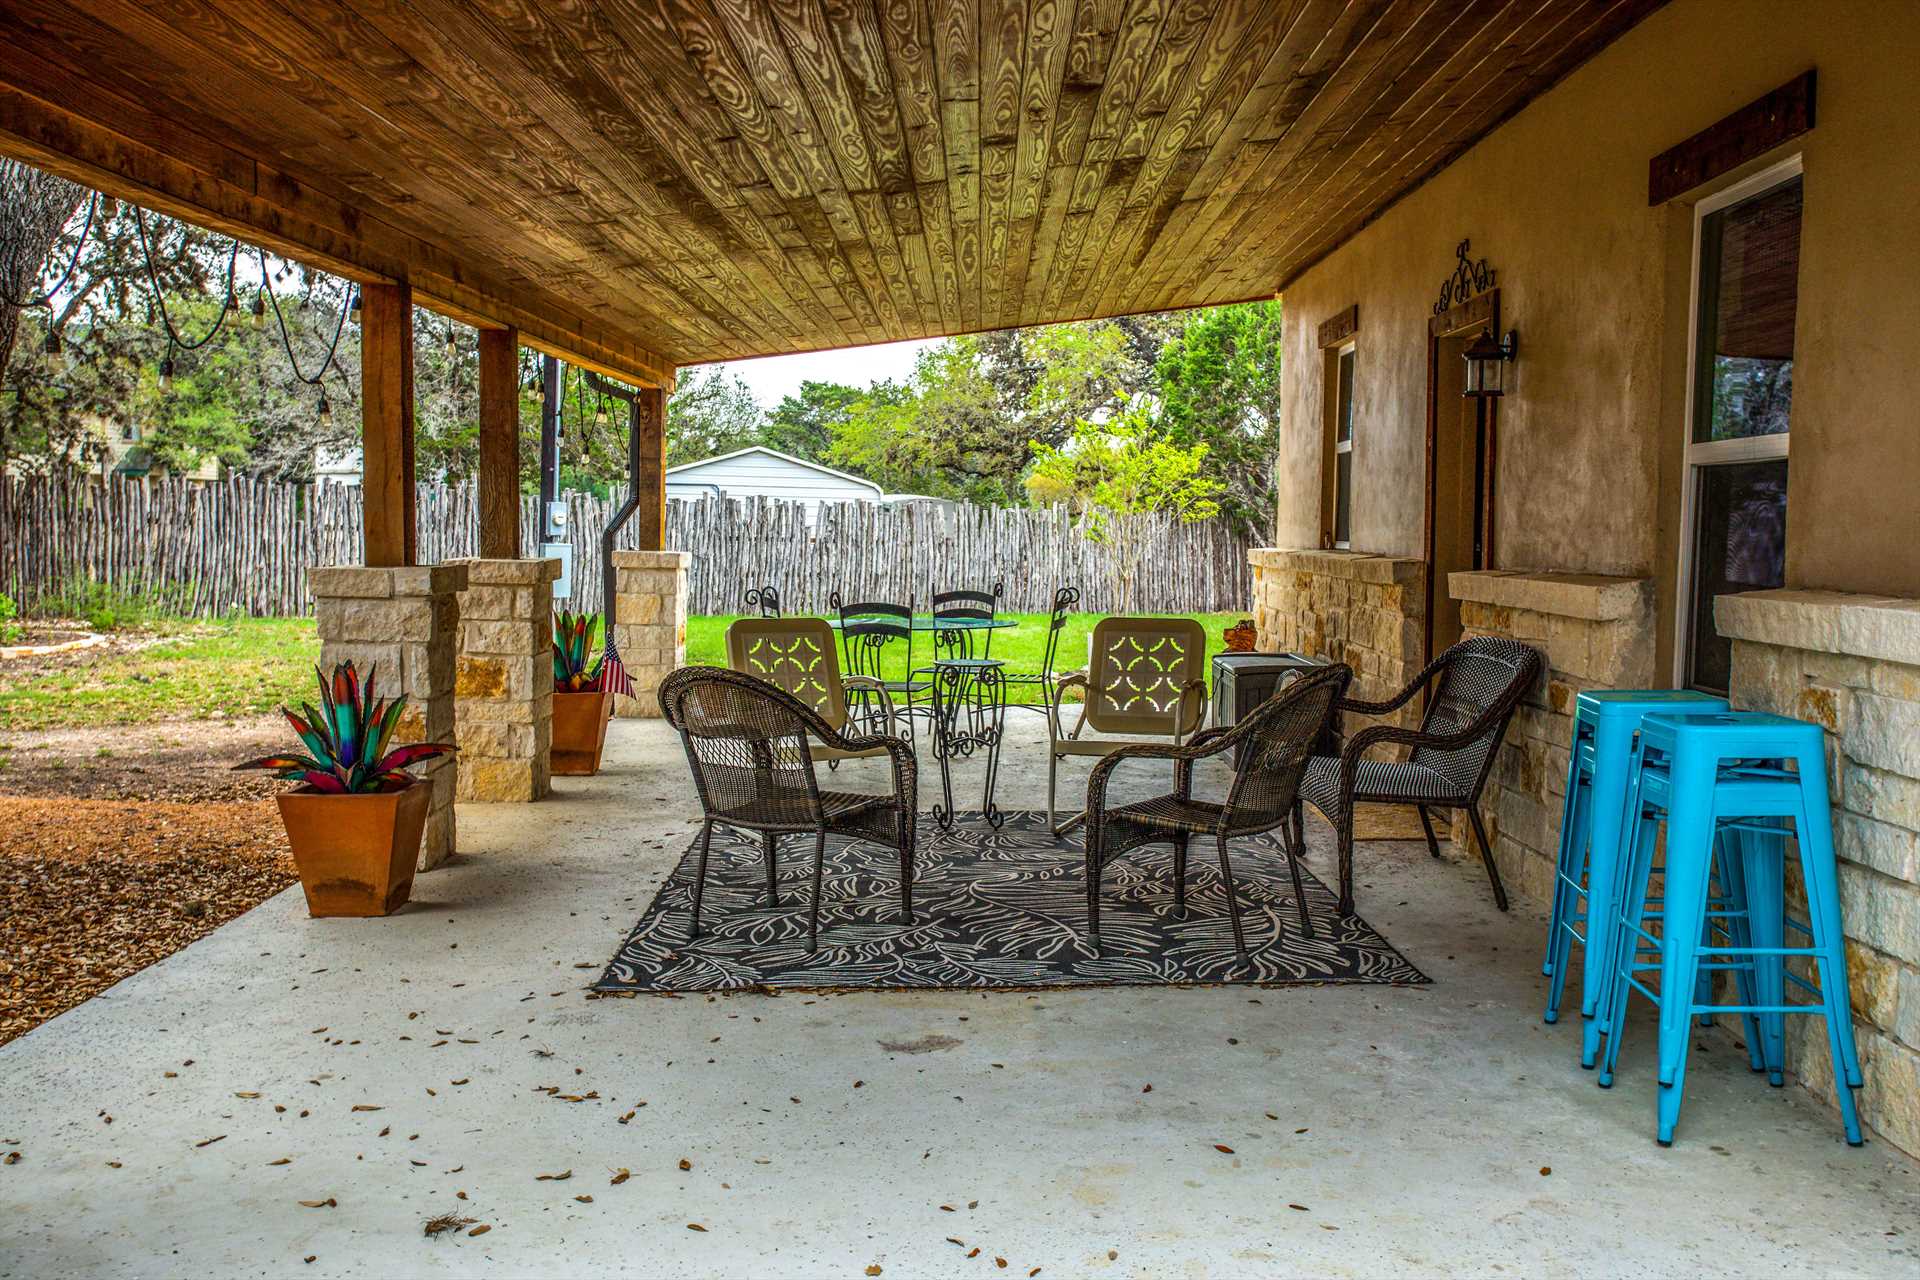                                                 Relax and converse in the fresh country breezes on the comfy outdoor furniture on the shaded patio!